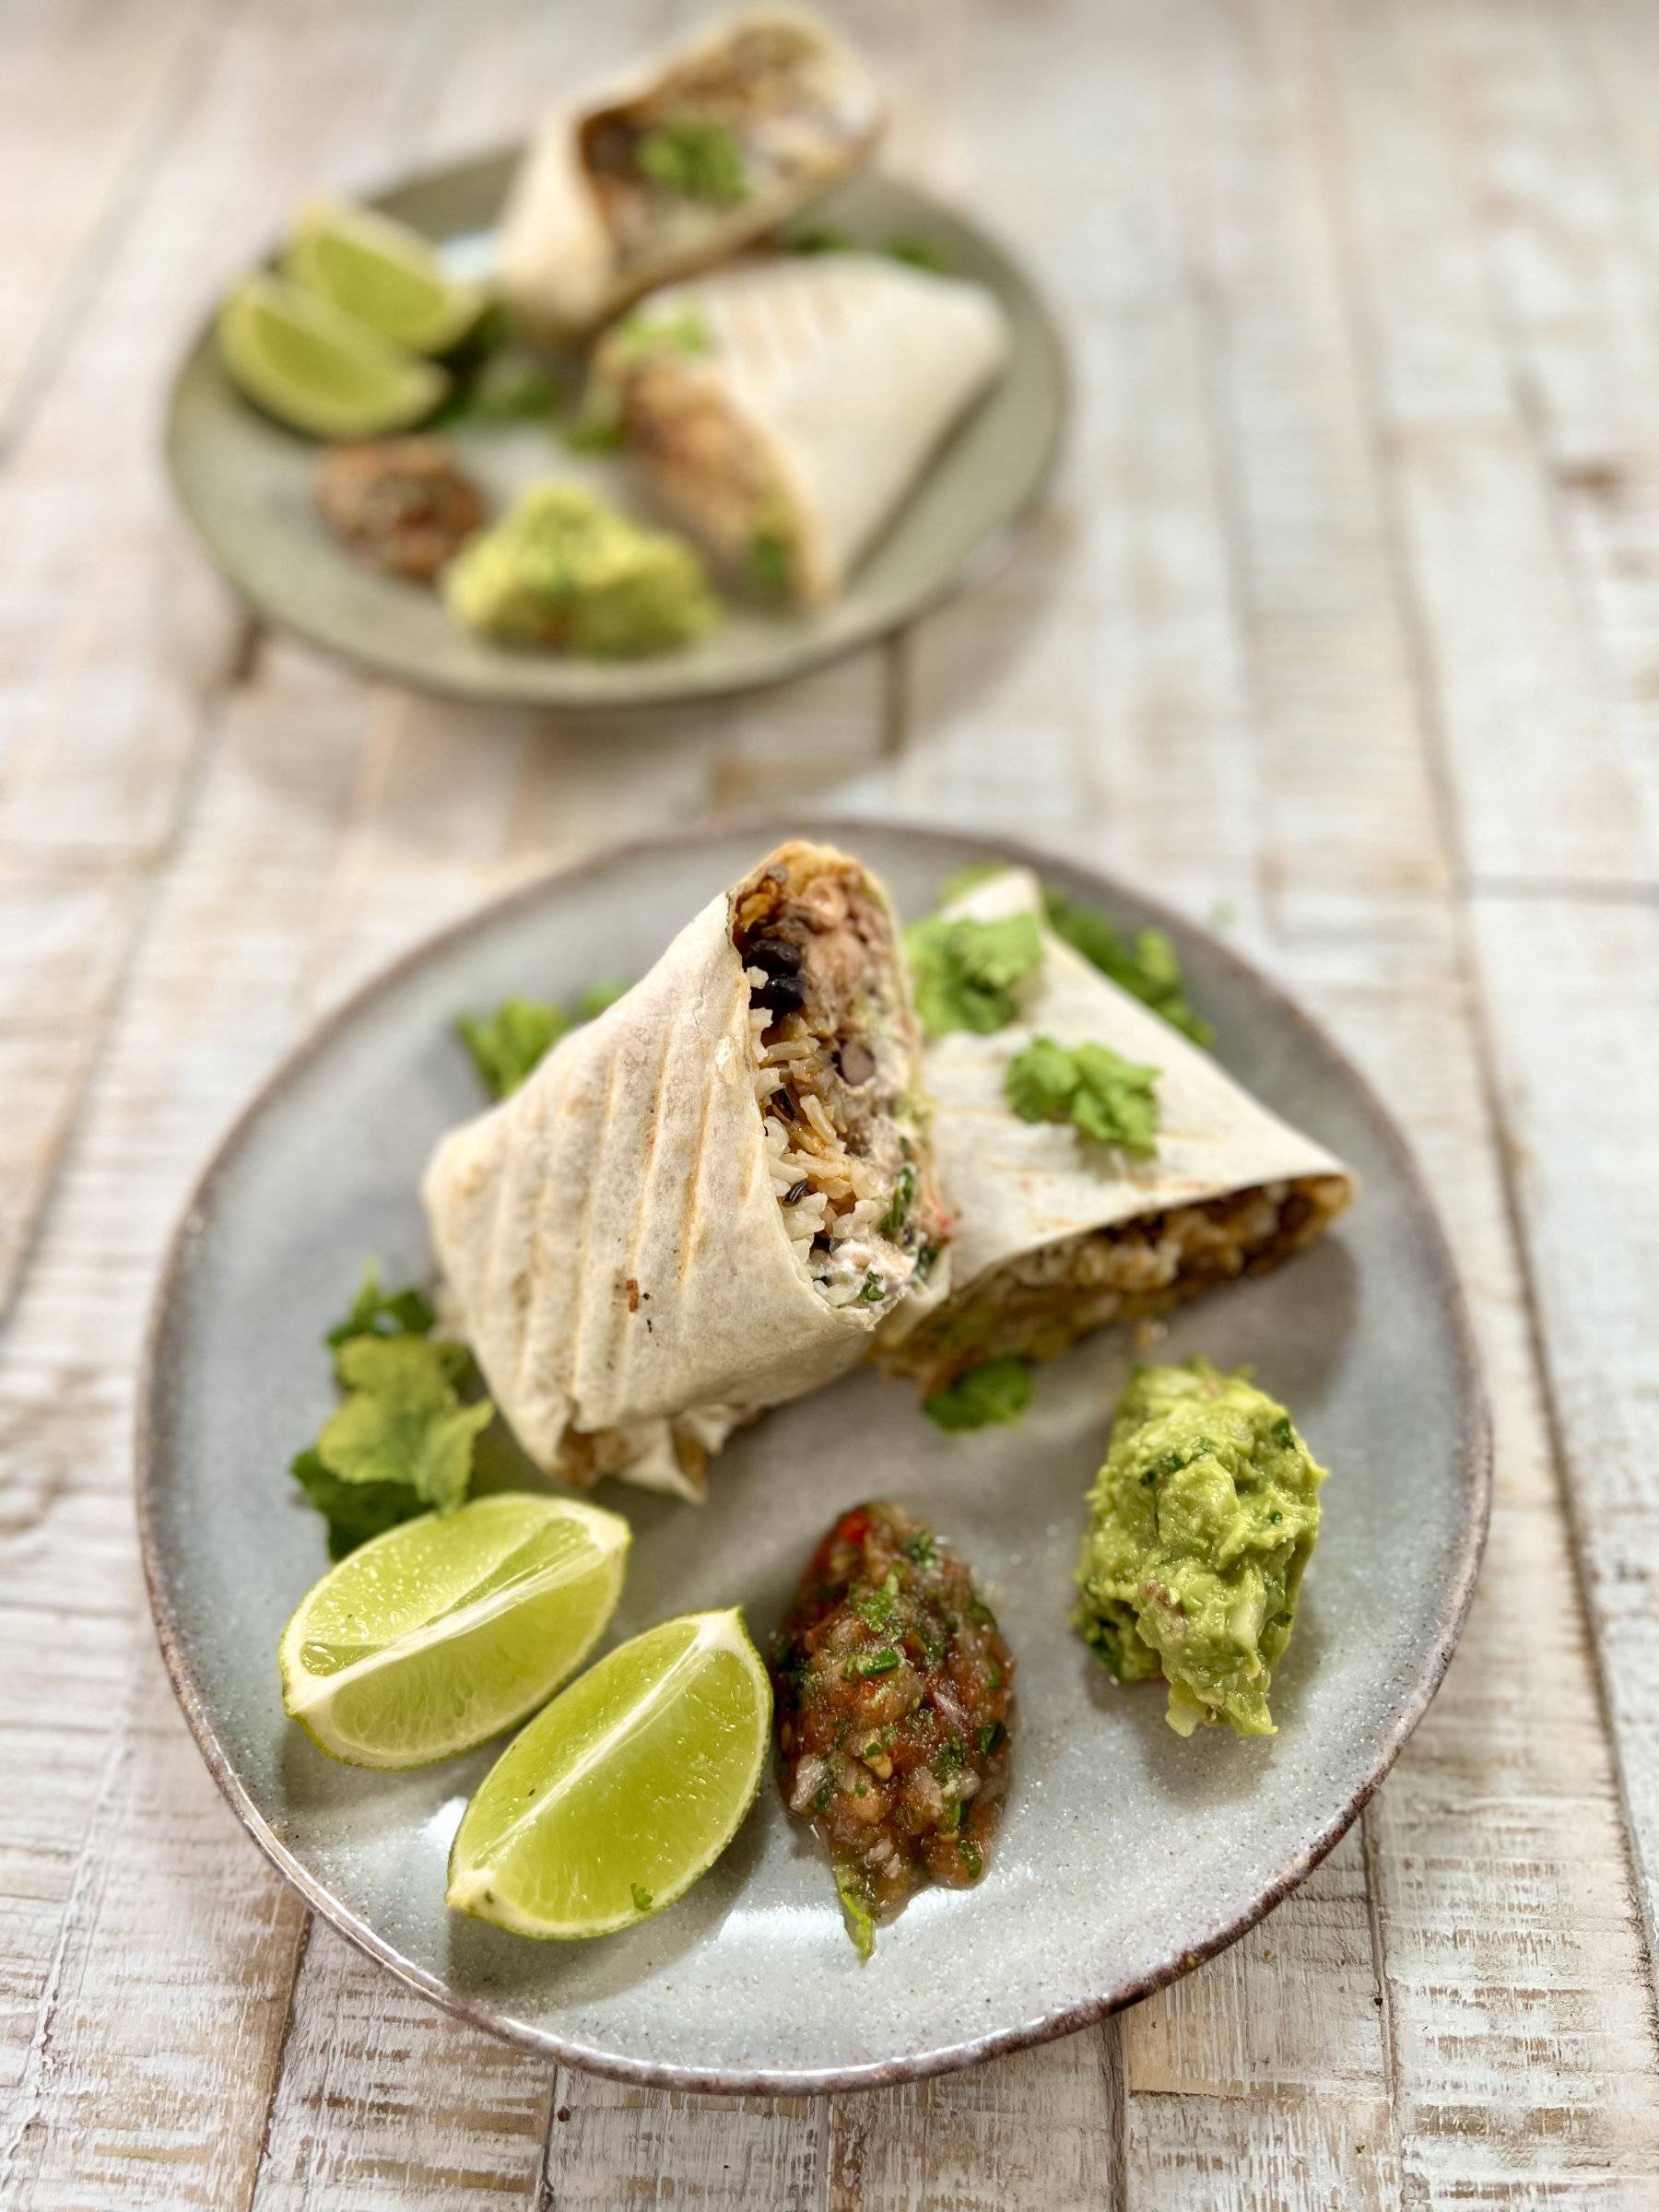 Delicious jackfruit burrito served, plated with salsa, guacamole, lime and cilantro